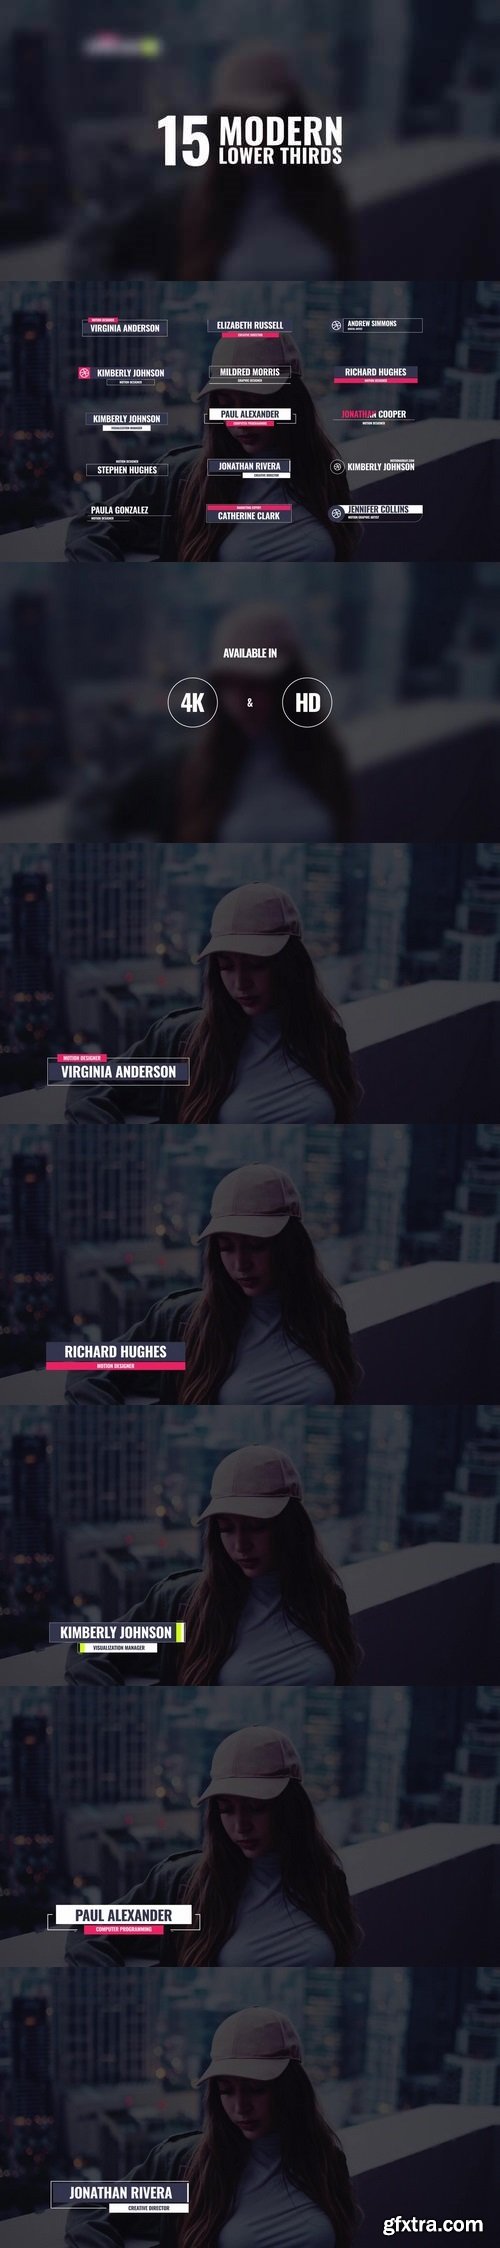 MotionArray - 15 Modern Lower Thirds After Effects Templates 58804